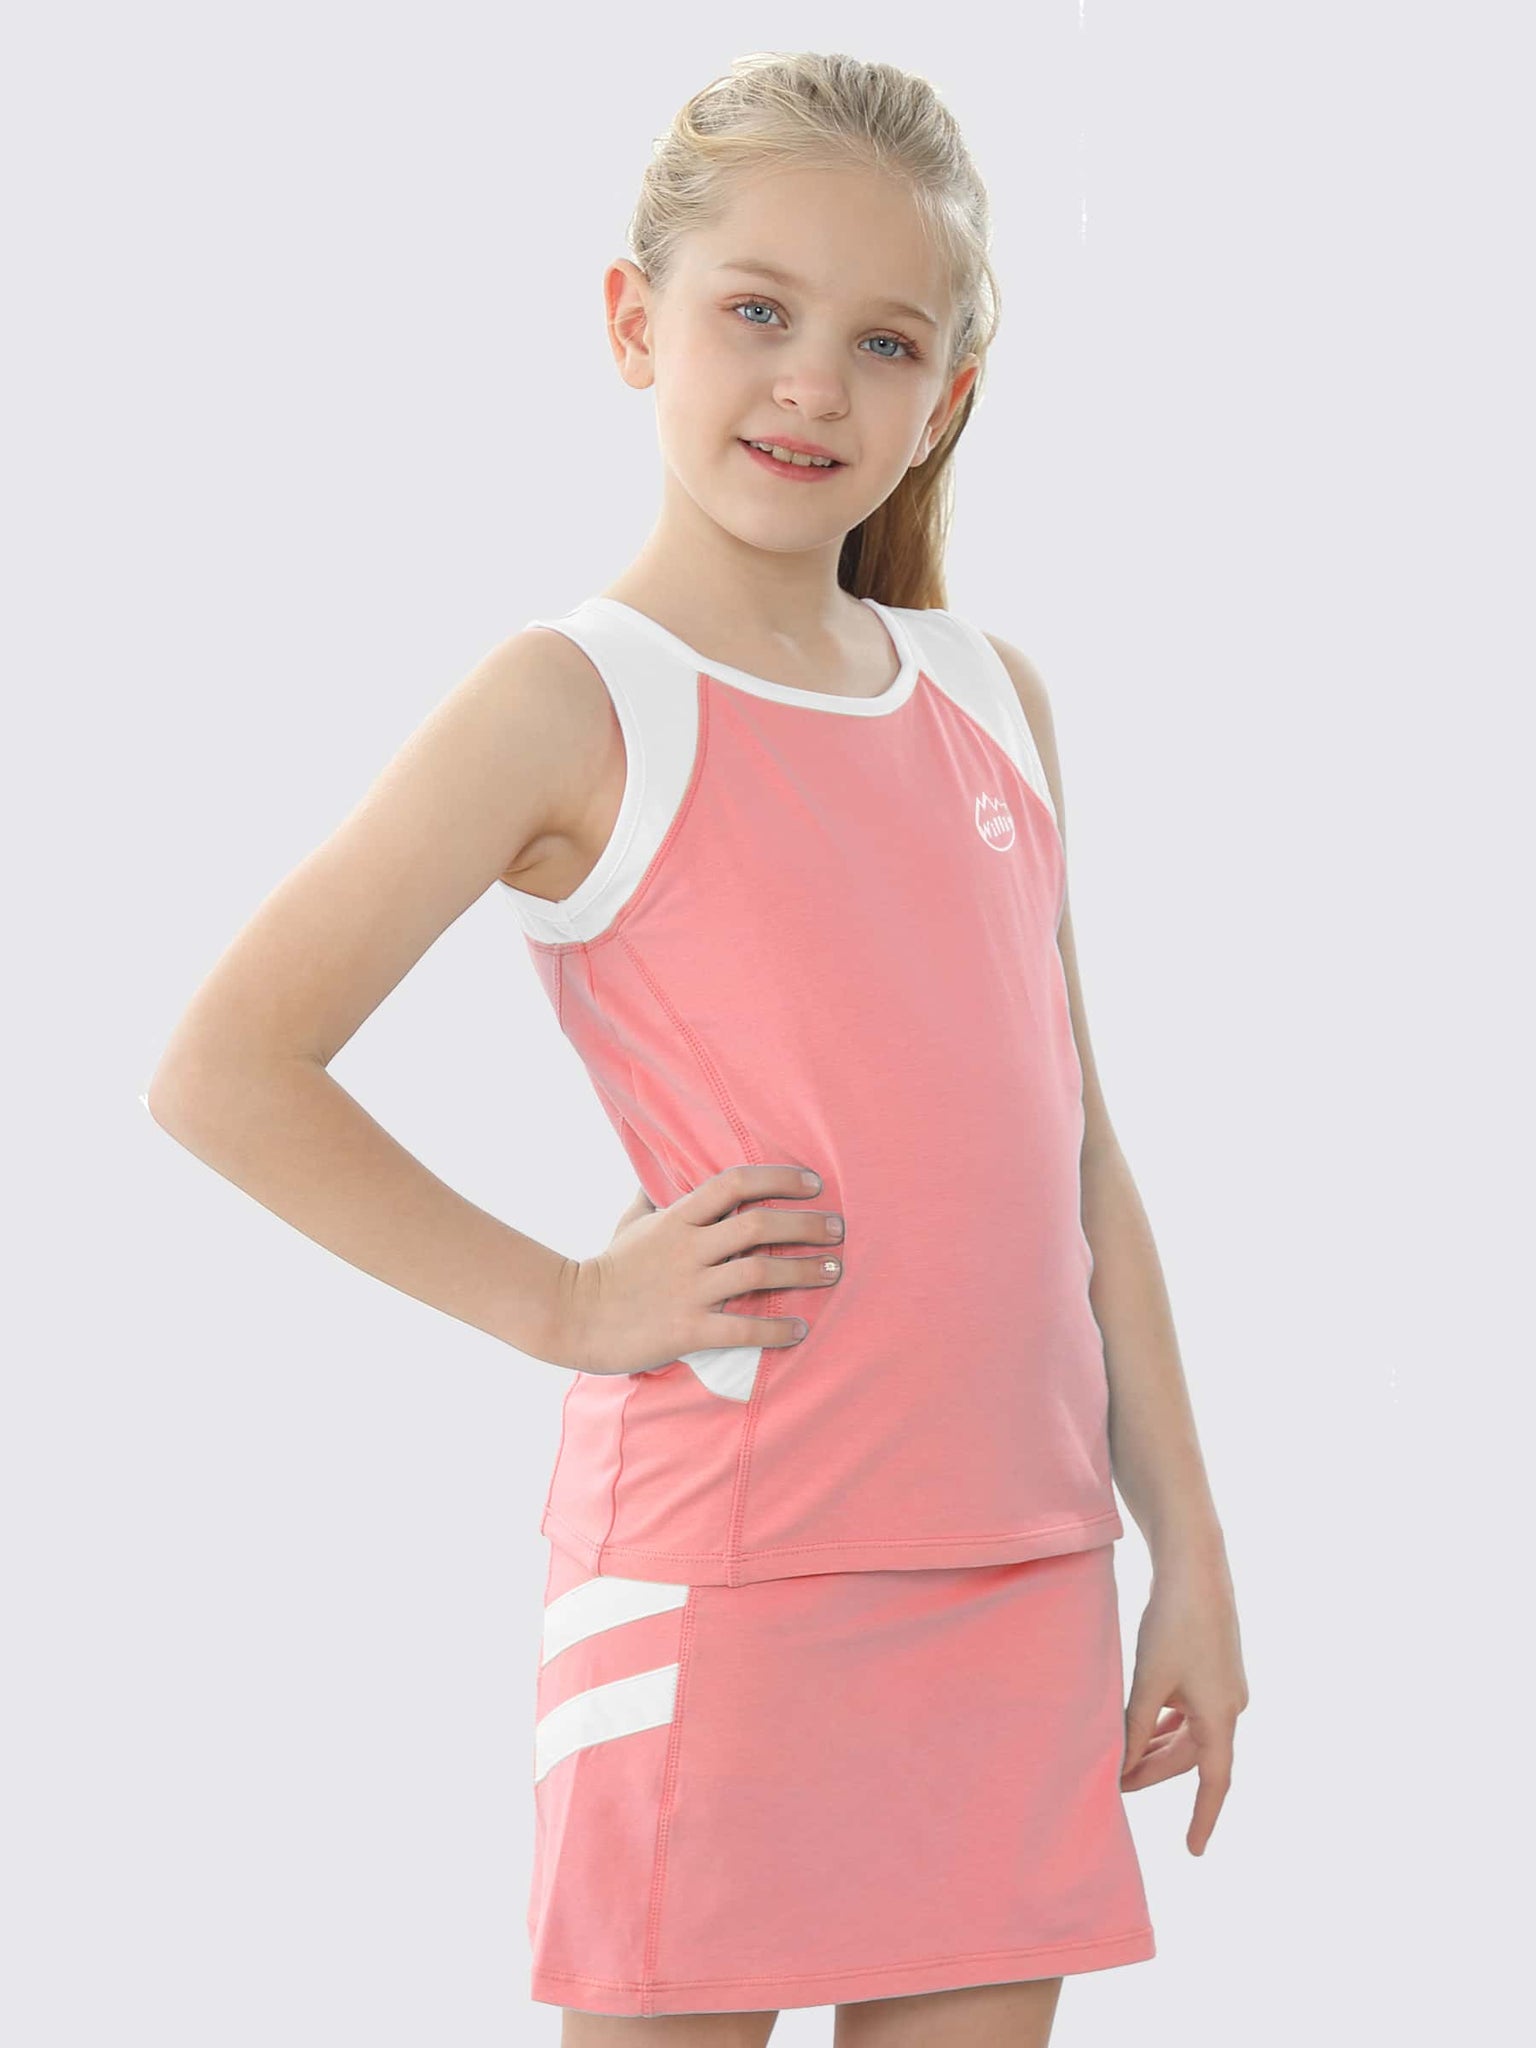 Willit Girls' Tennis Outfit_Pink_model2